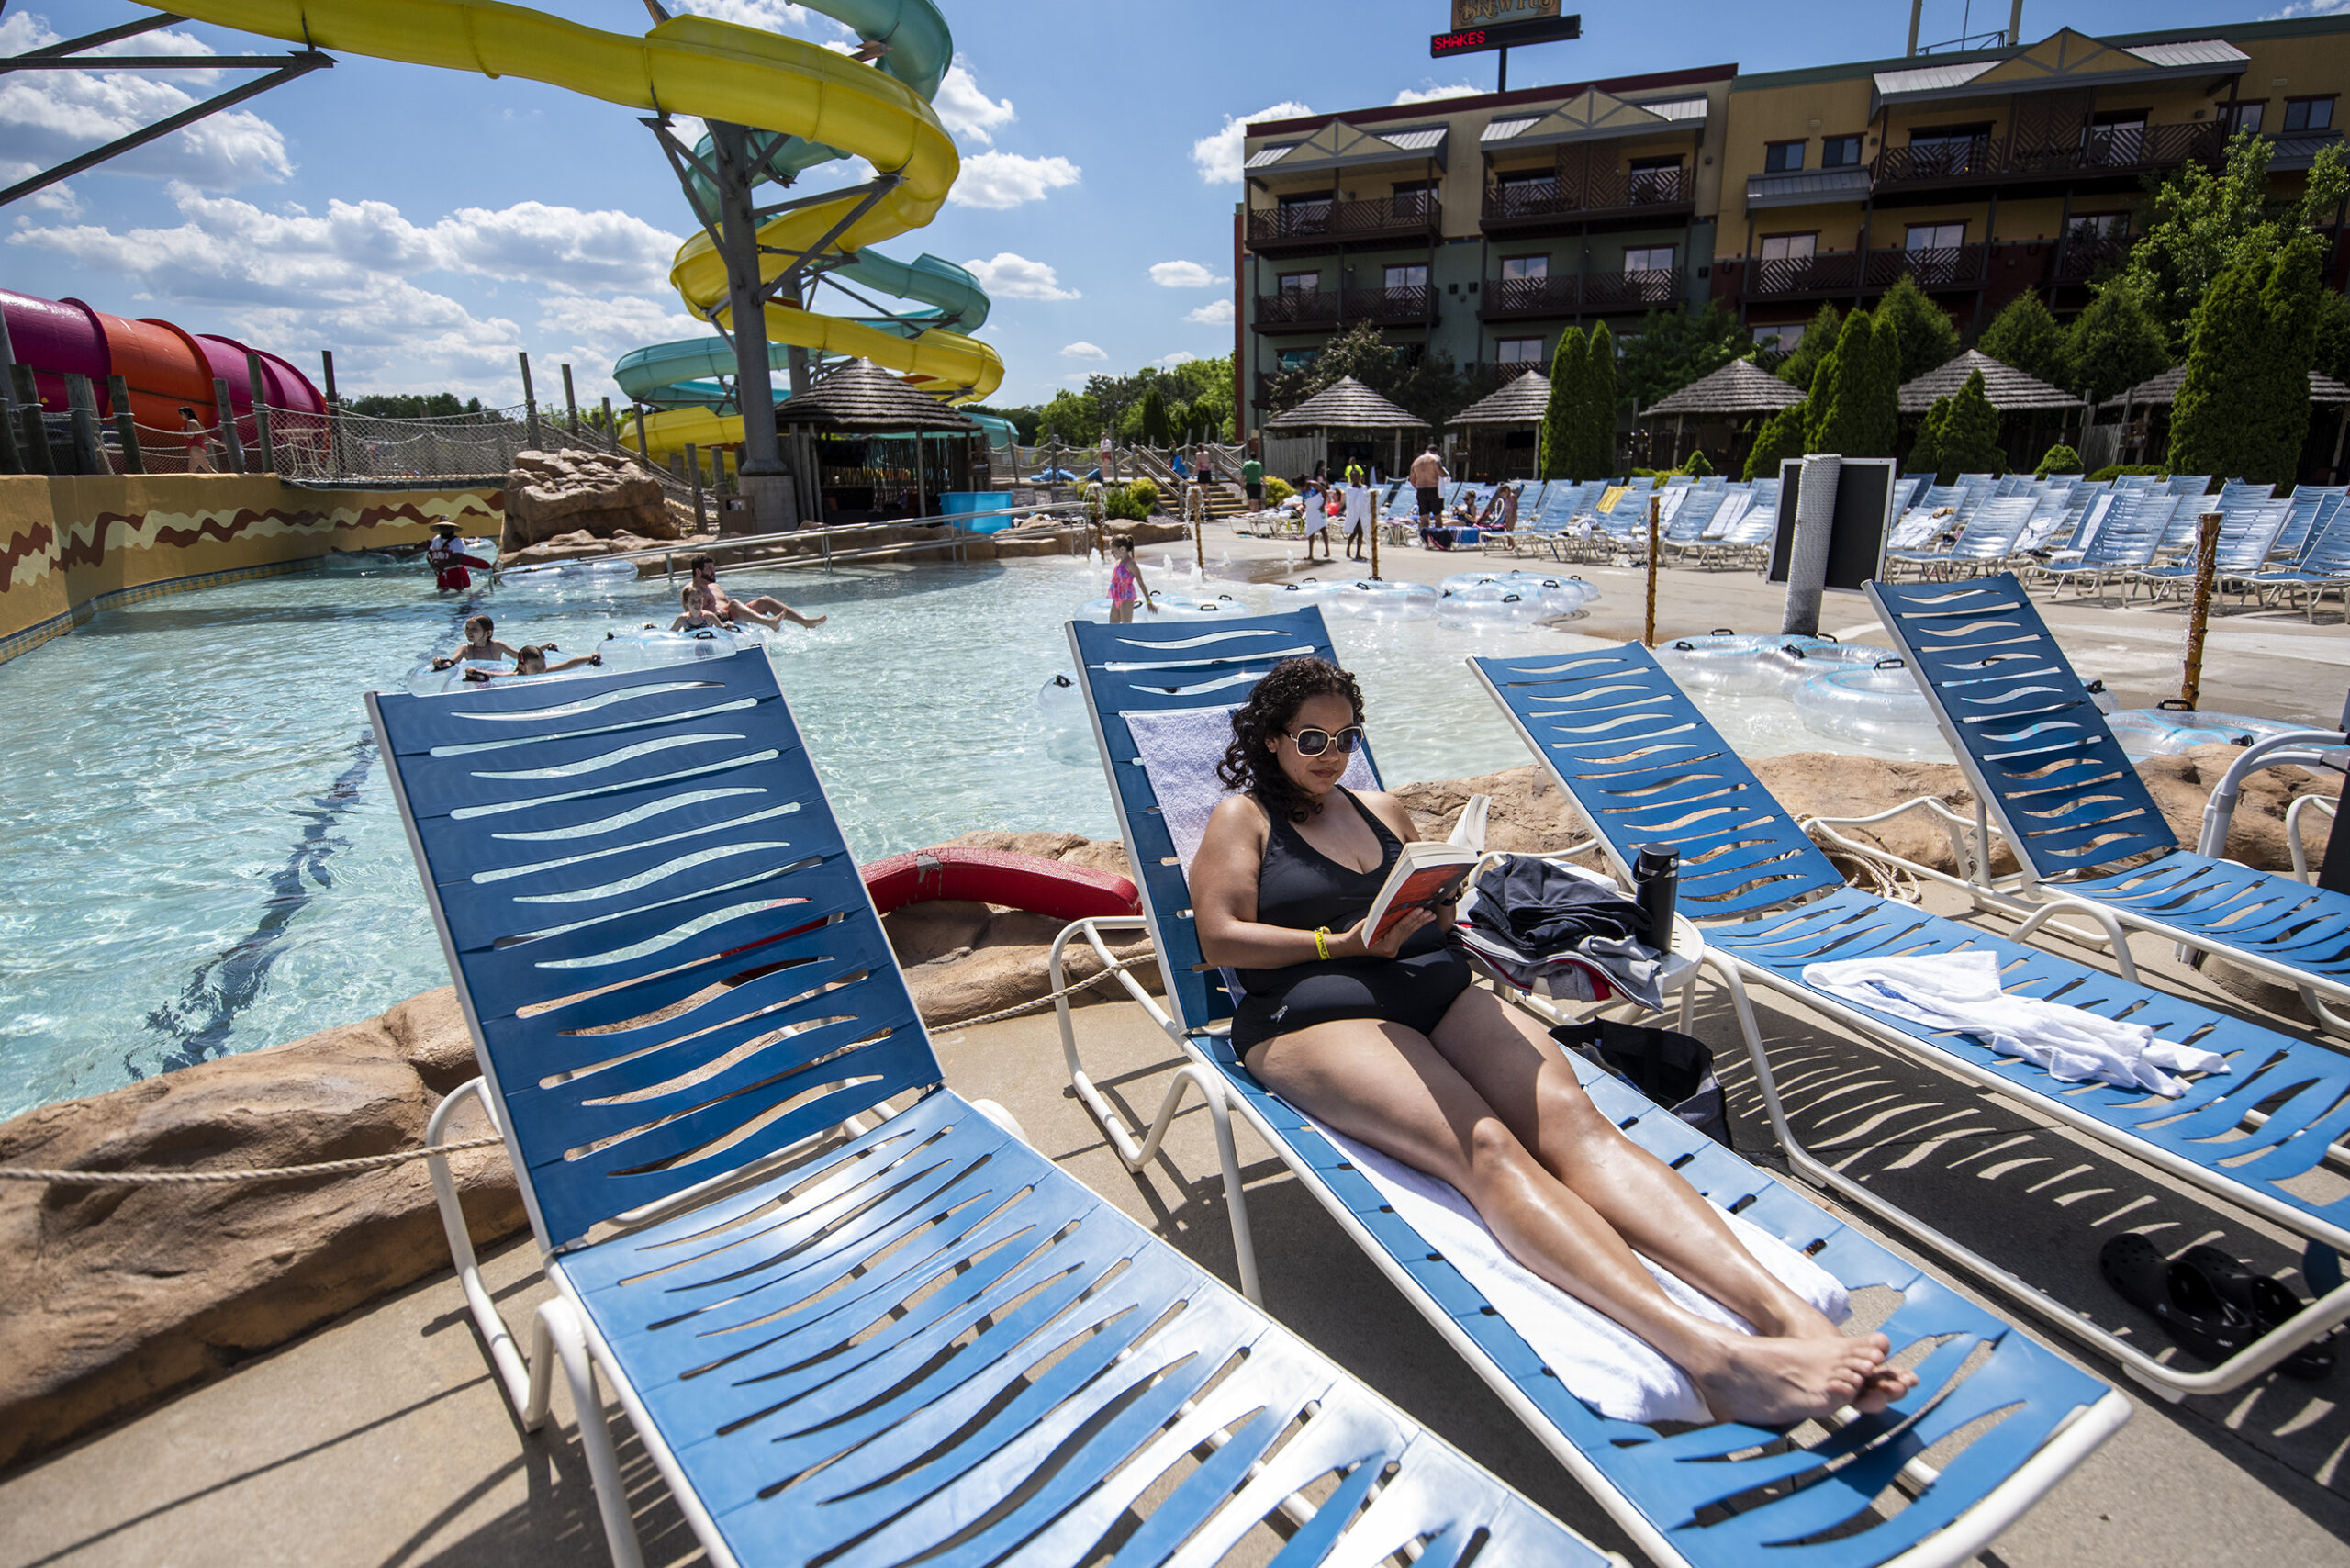 A woman sits in a chair near a pool as she reads a book in her swim suit.